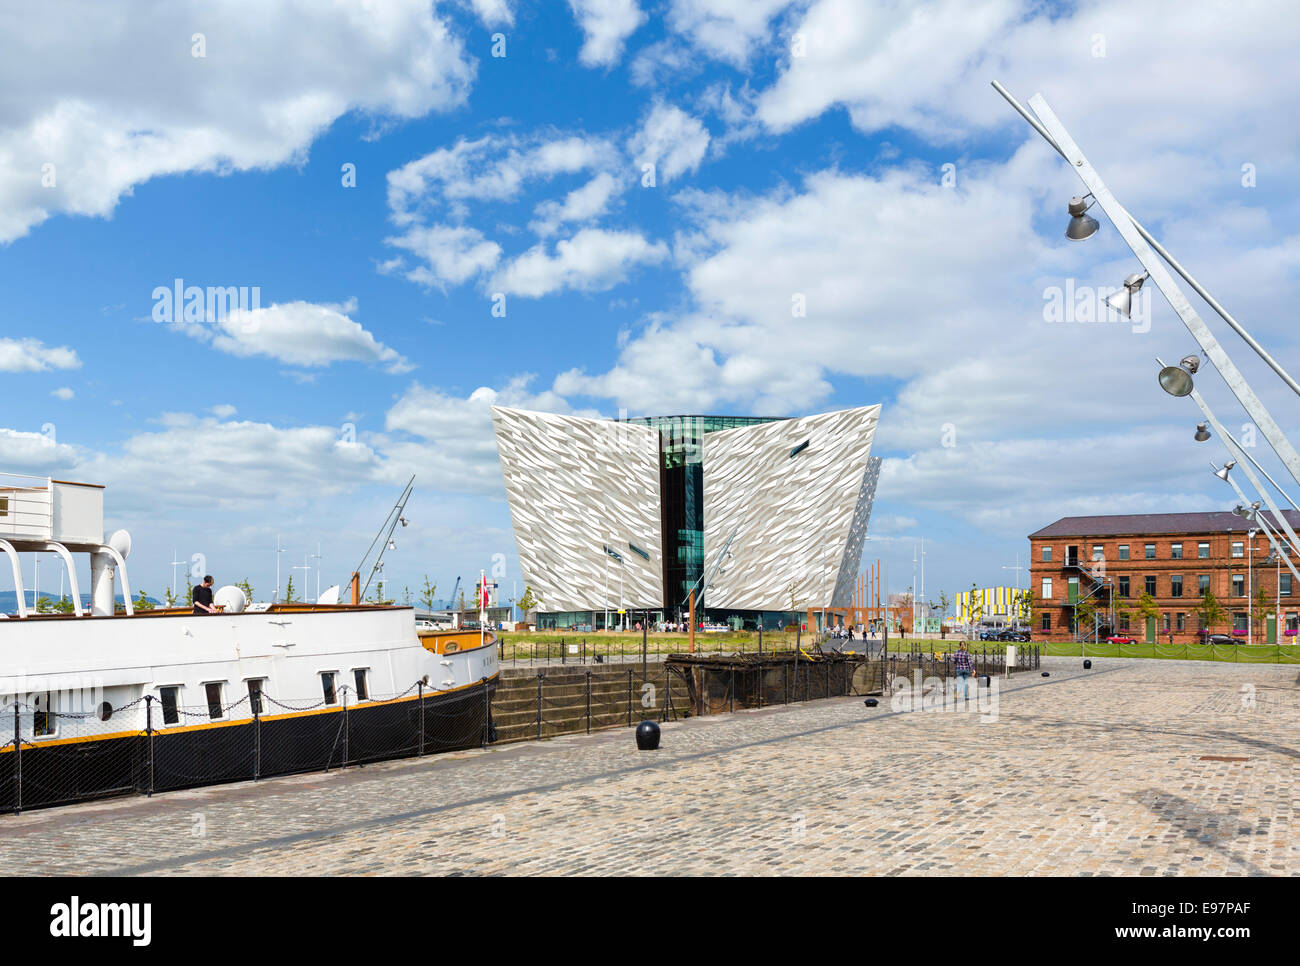 Titanic Belfast museum with the SS Nomadic steamship tender to the left, Titanic Quarter, Belfast, Northern Ireland, UK Stock Photo